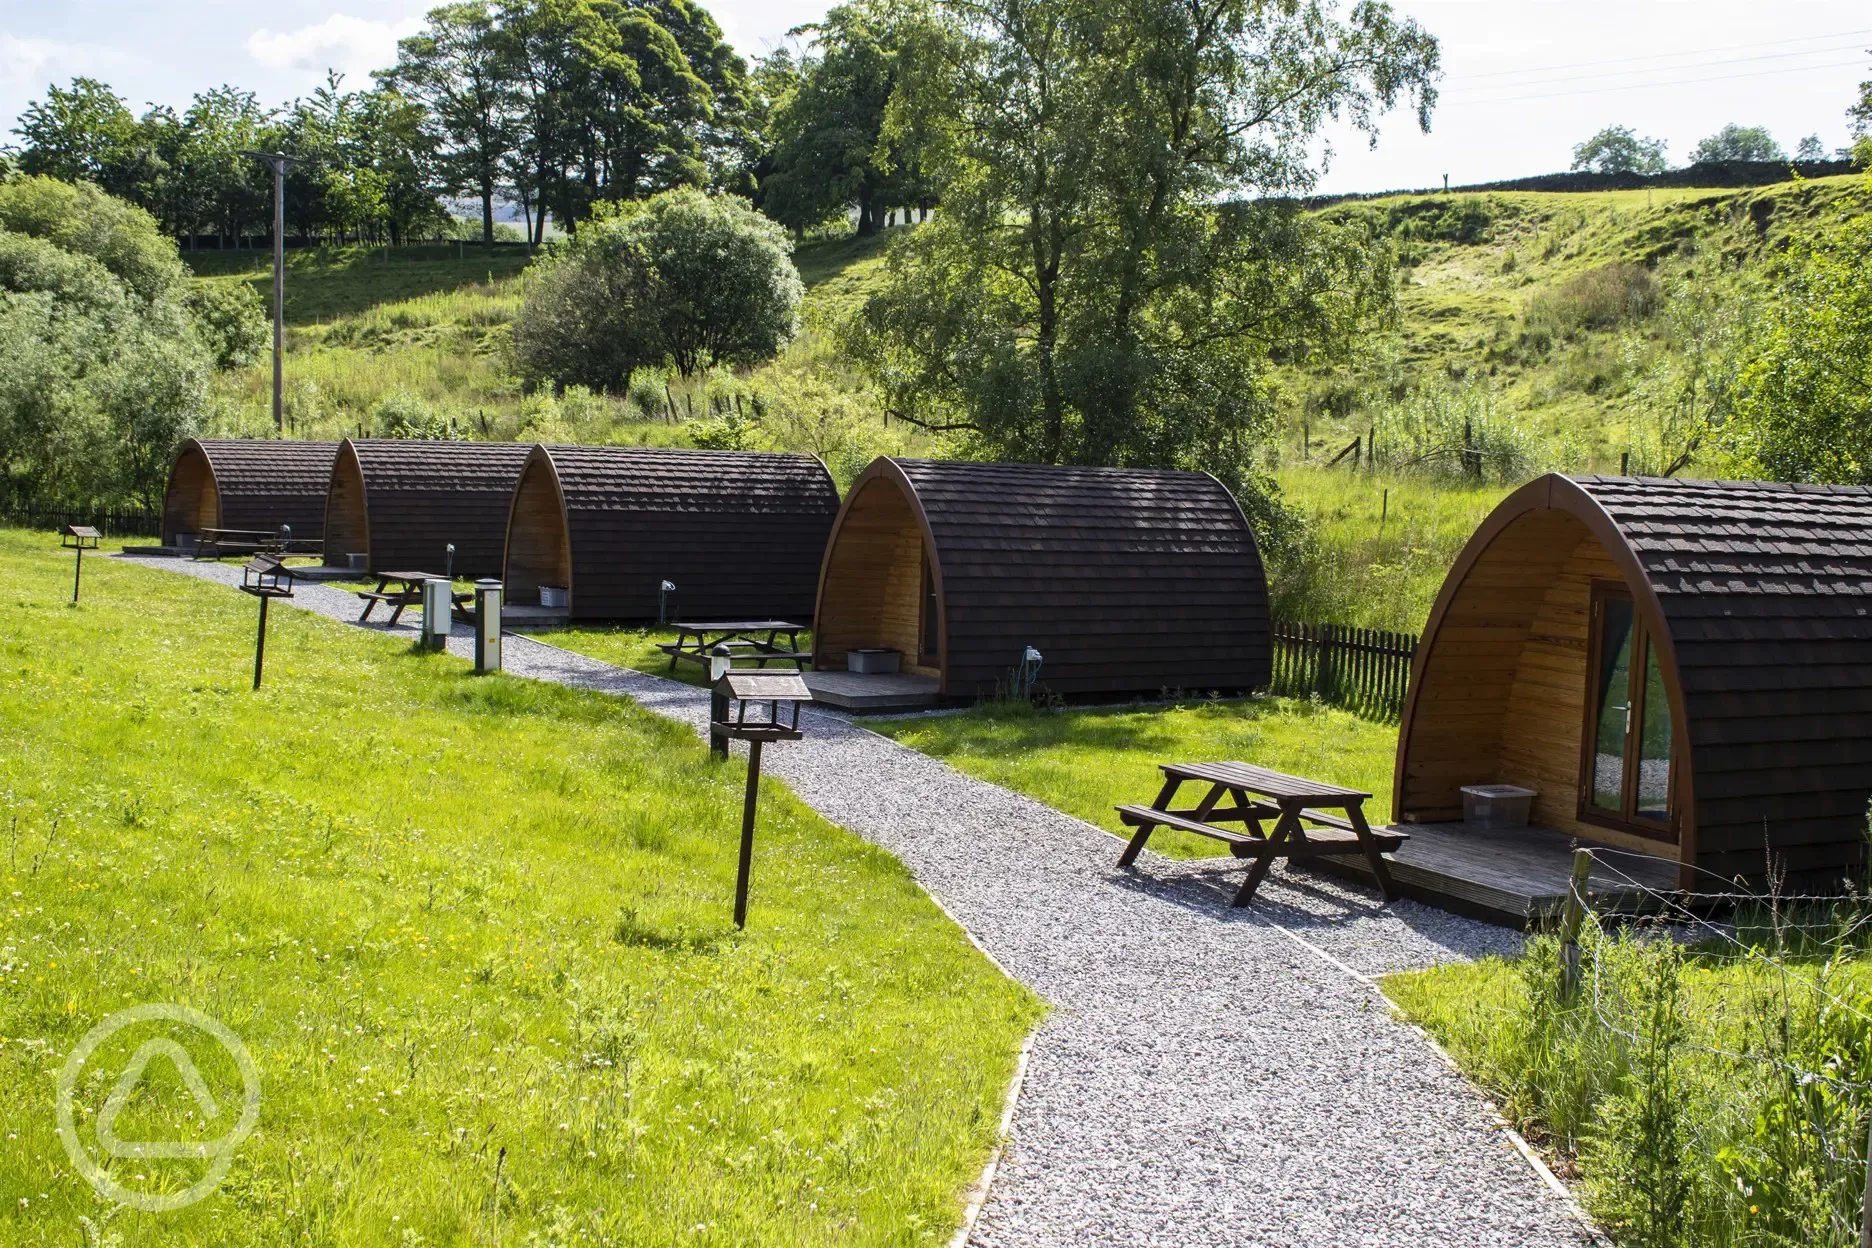 Camping pods at Hayfield